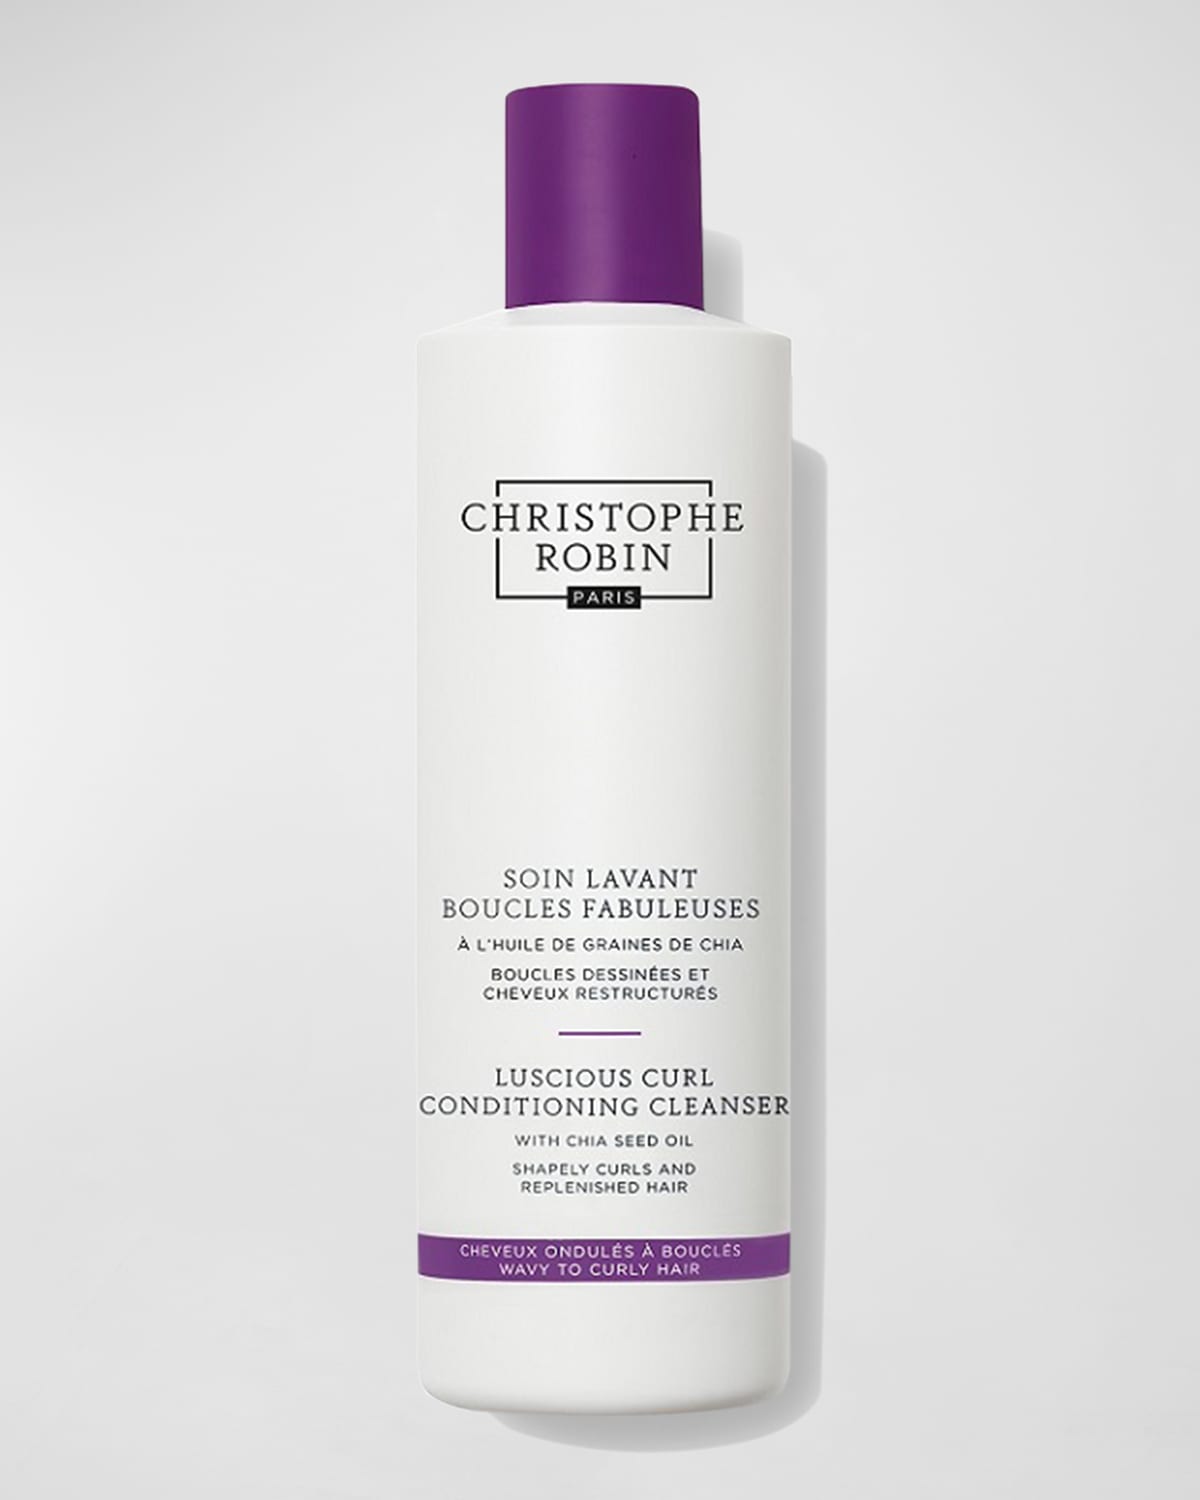 Christophe Robin 8.5 oz. Luscious Curl Conditioning Cleanser